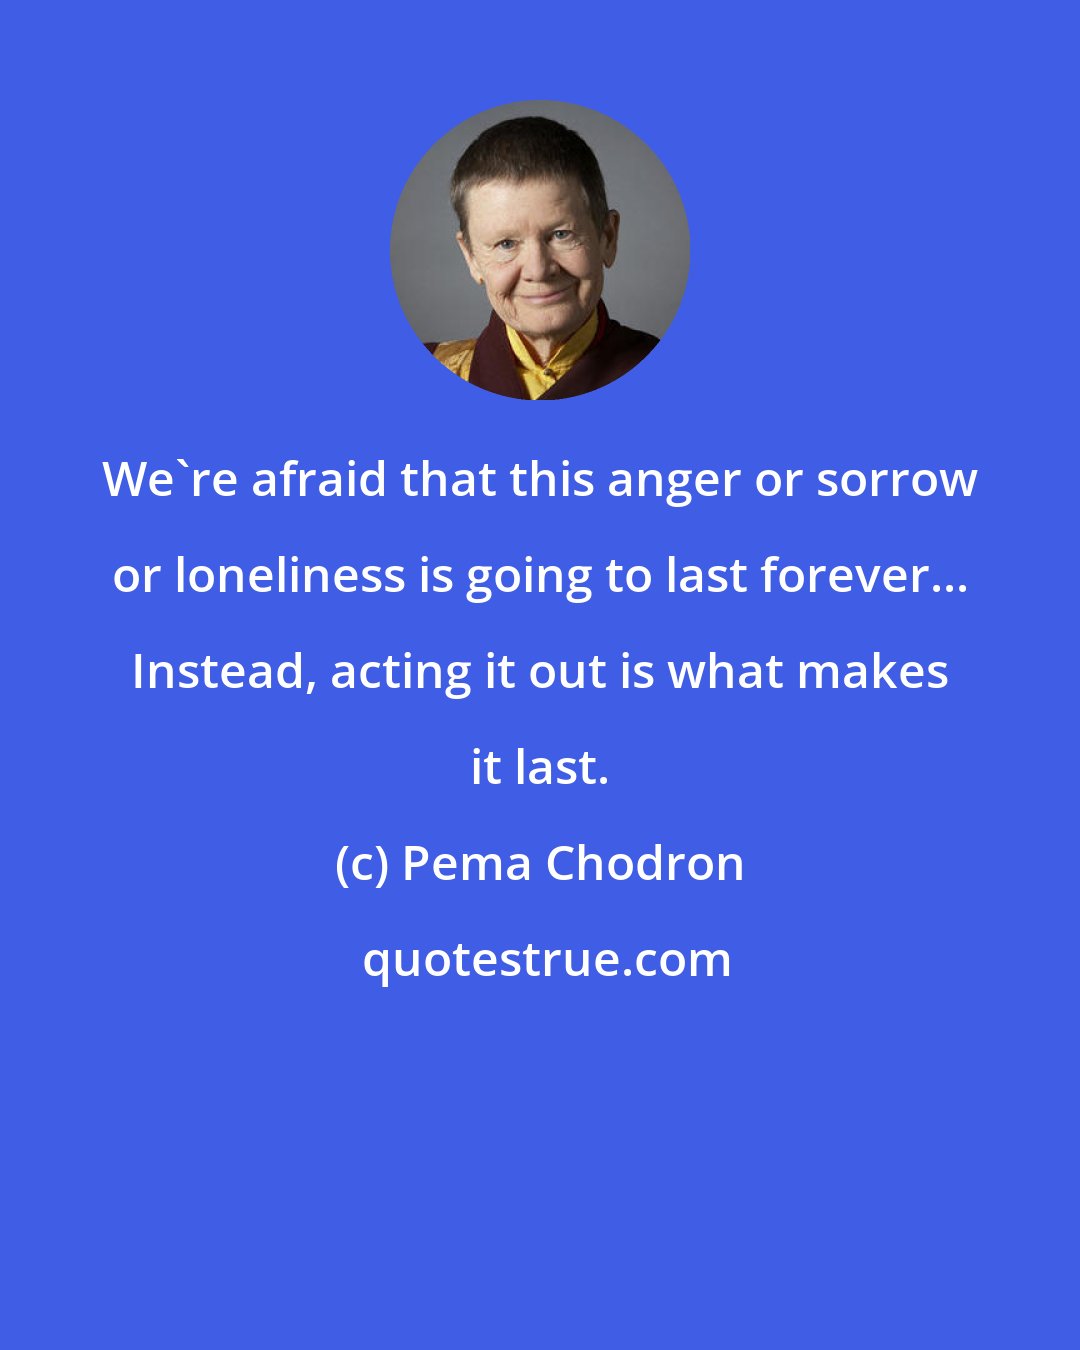 Pema Chodron: We're afraid that this anger or sorrow or loneliness is going to last forever... Instead, acting it out is what makes it last.